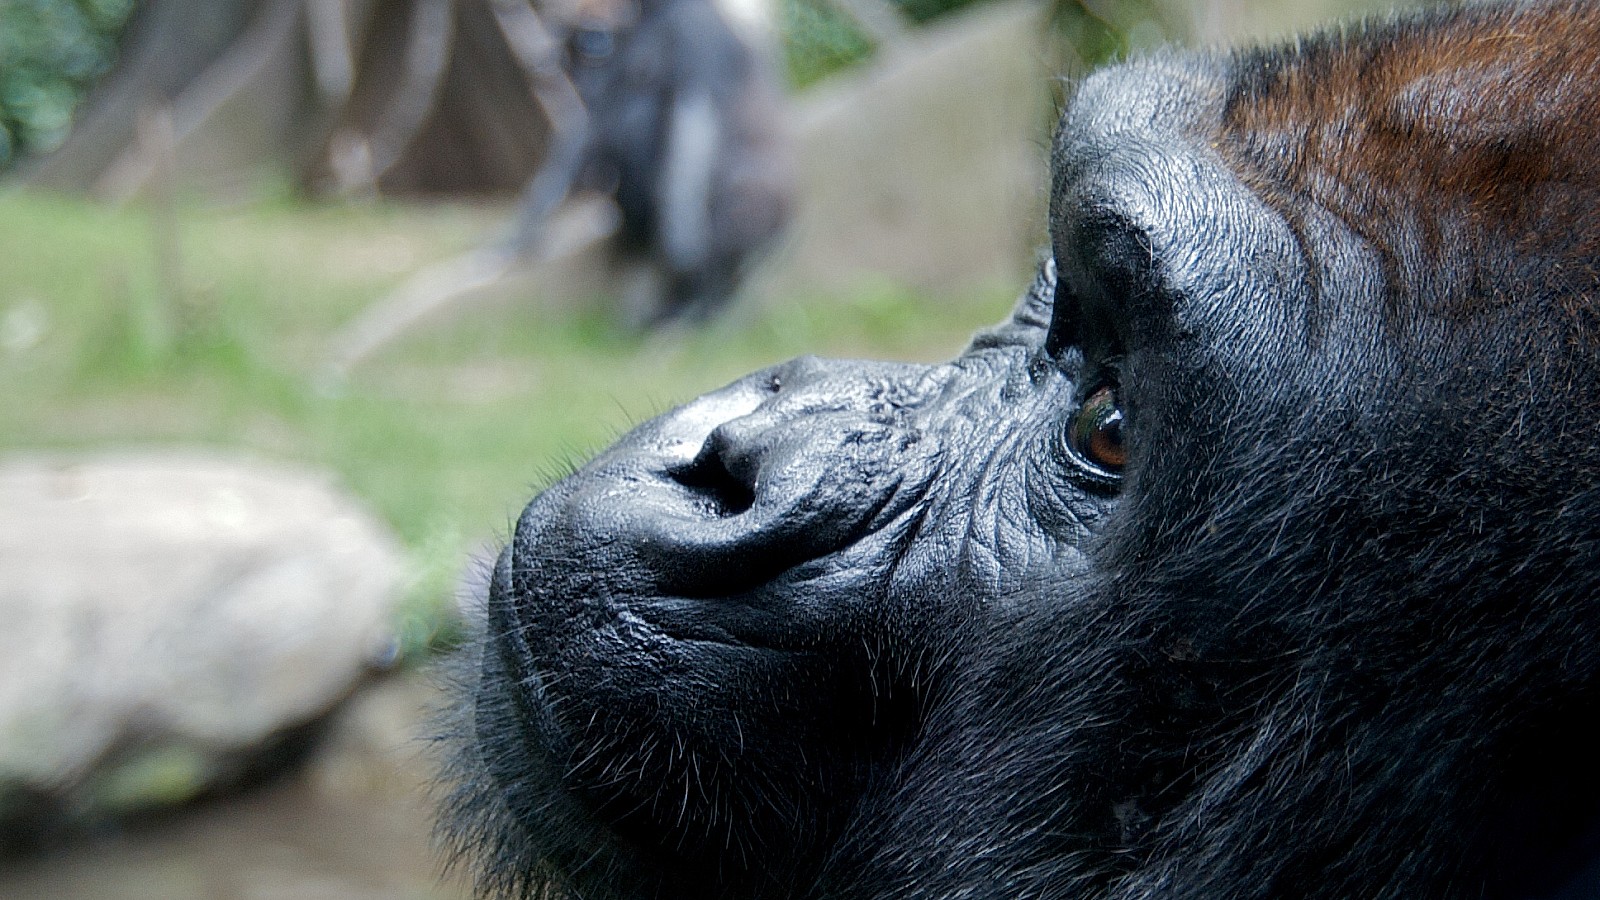 The western lowland gorilla's handlers said phones were too distracting | Fred Hsu/Wikimedia Commons